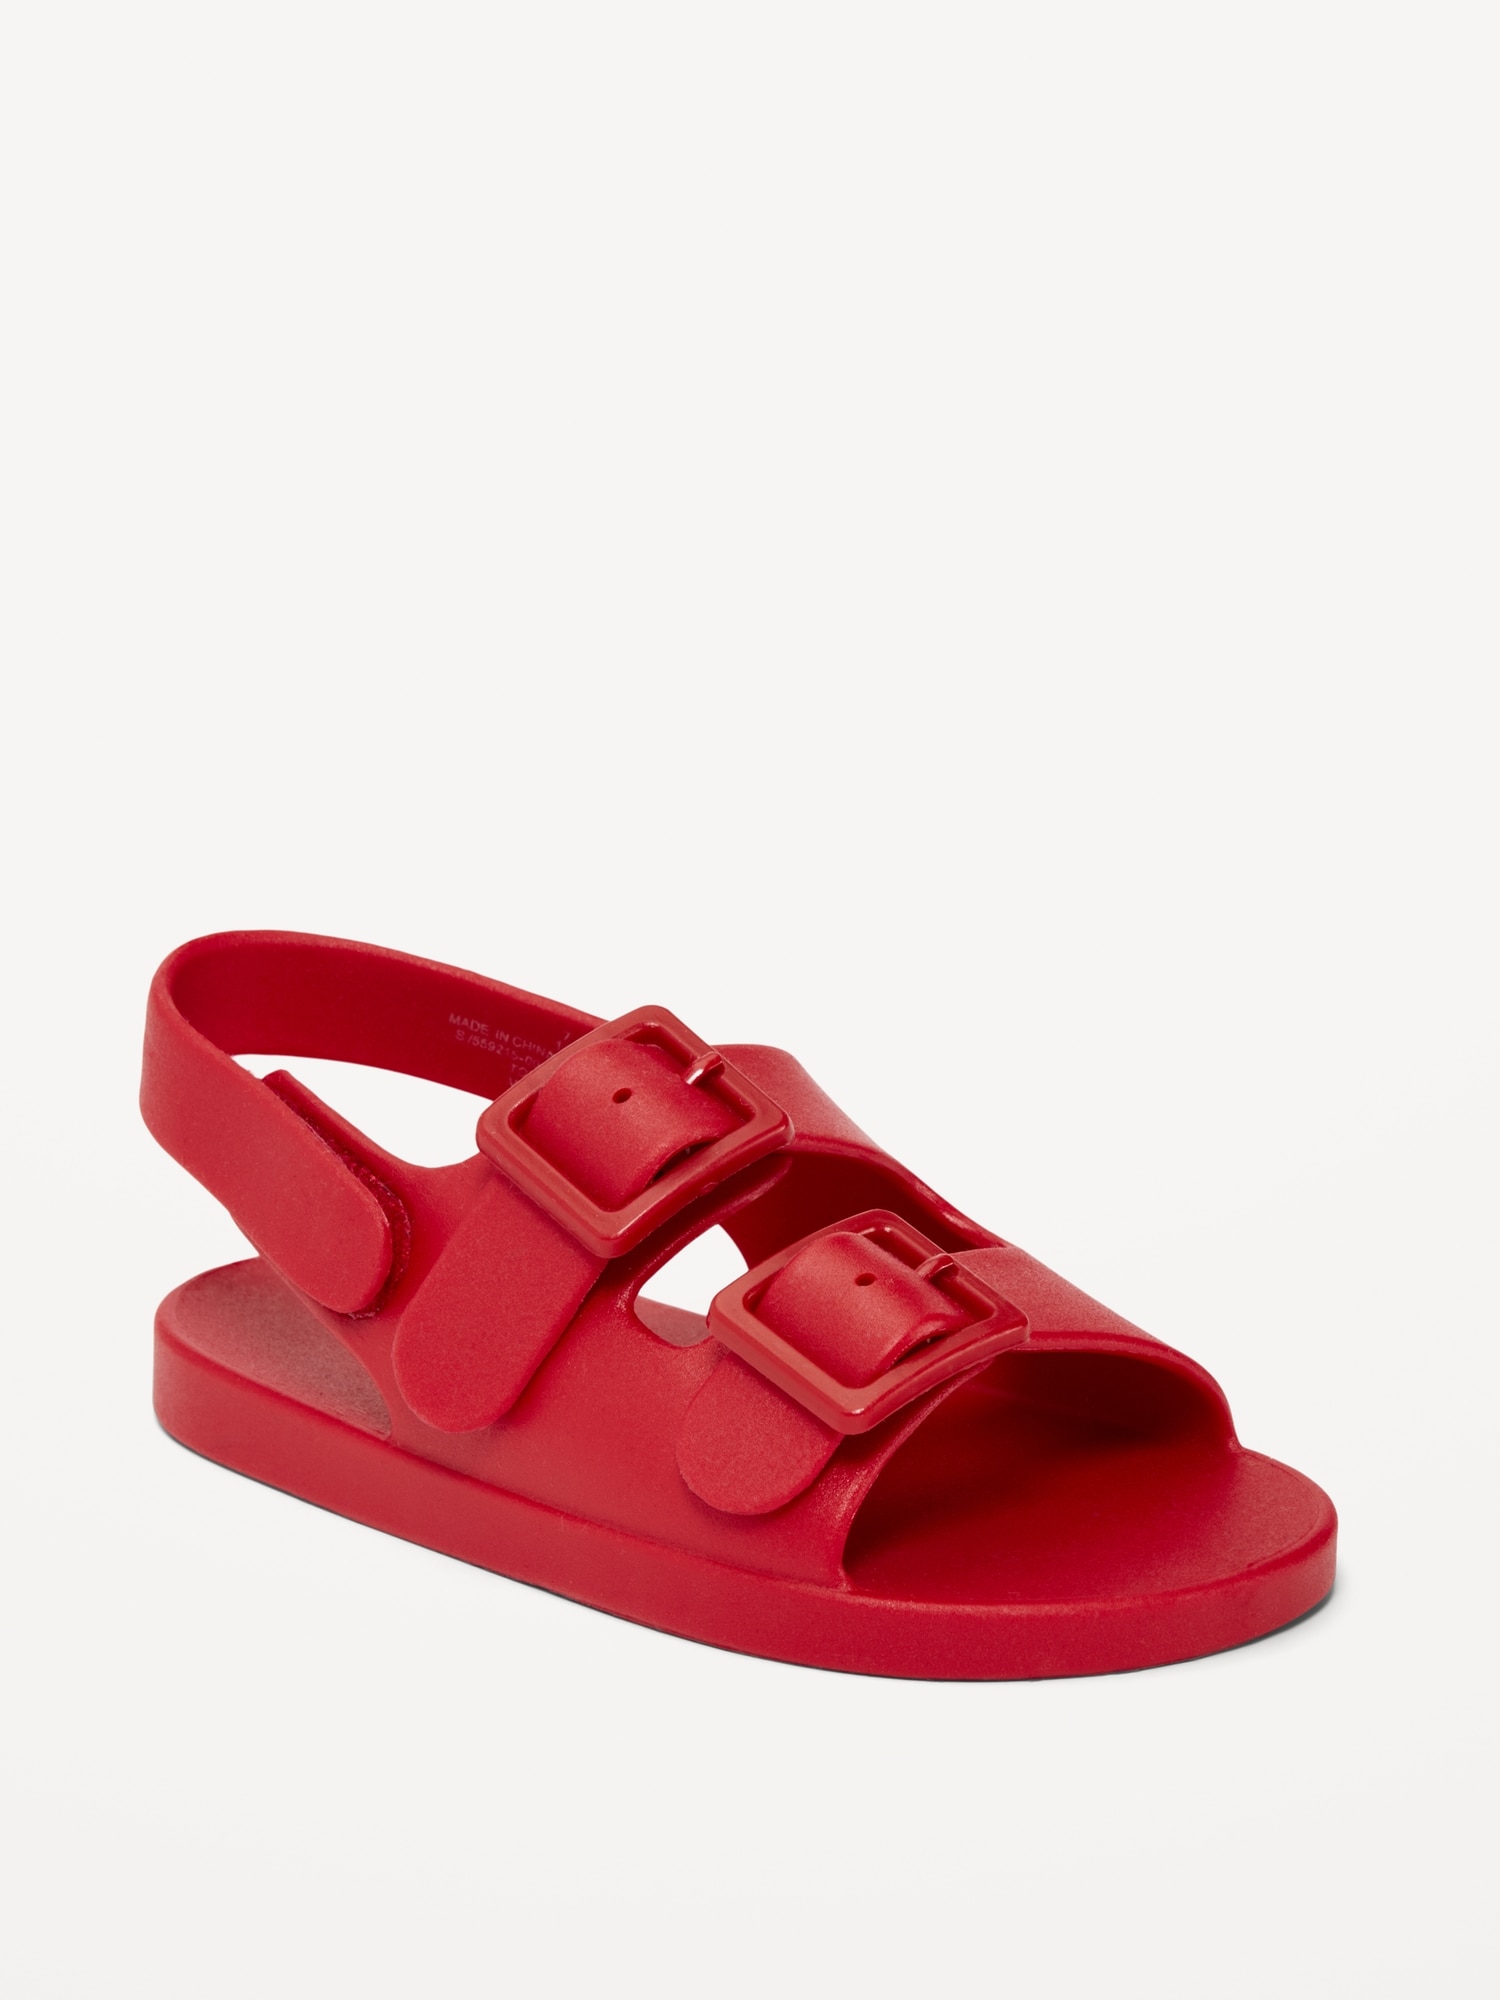 Unisex Jelly Double-Buckle Sandals for Toddler